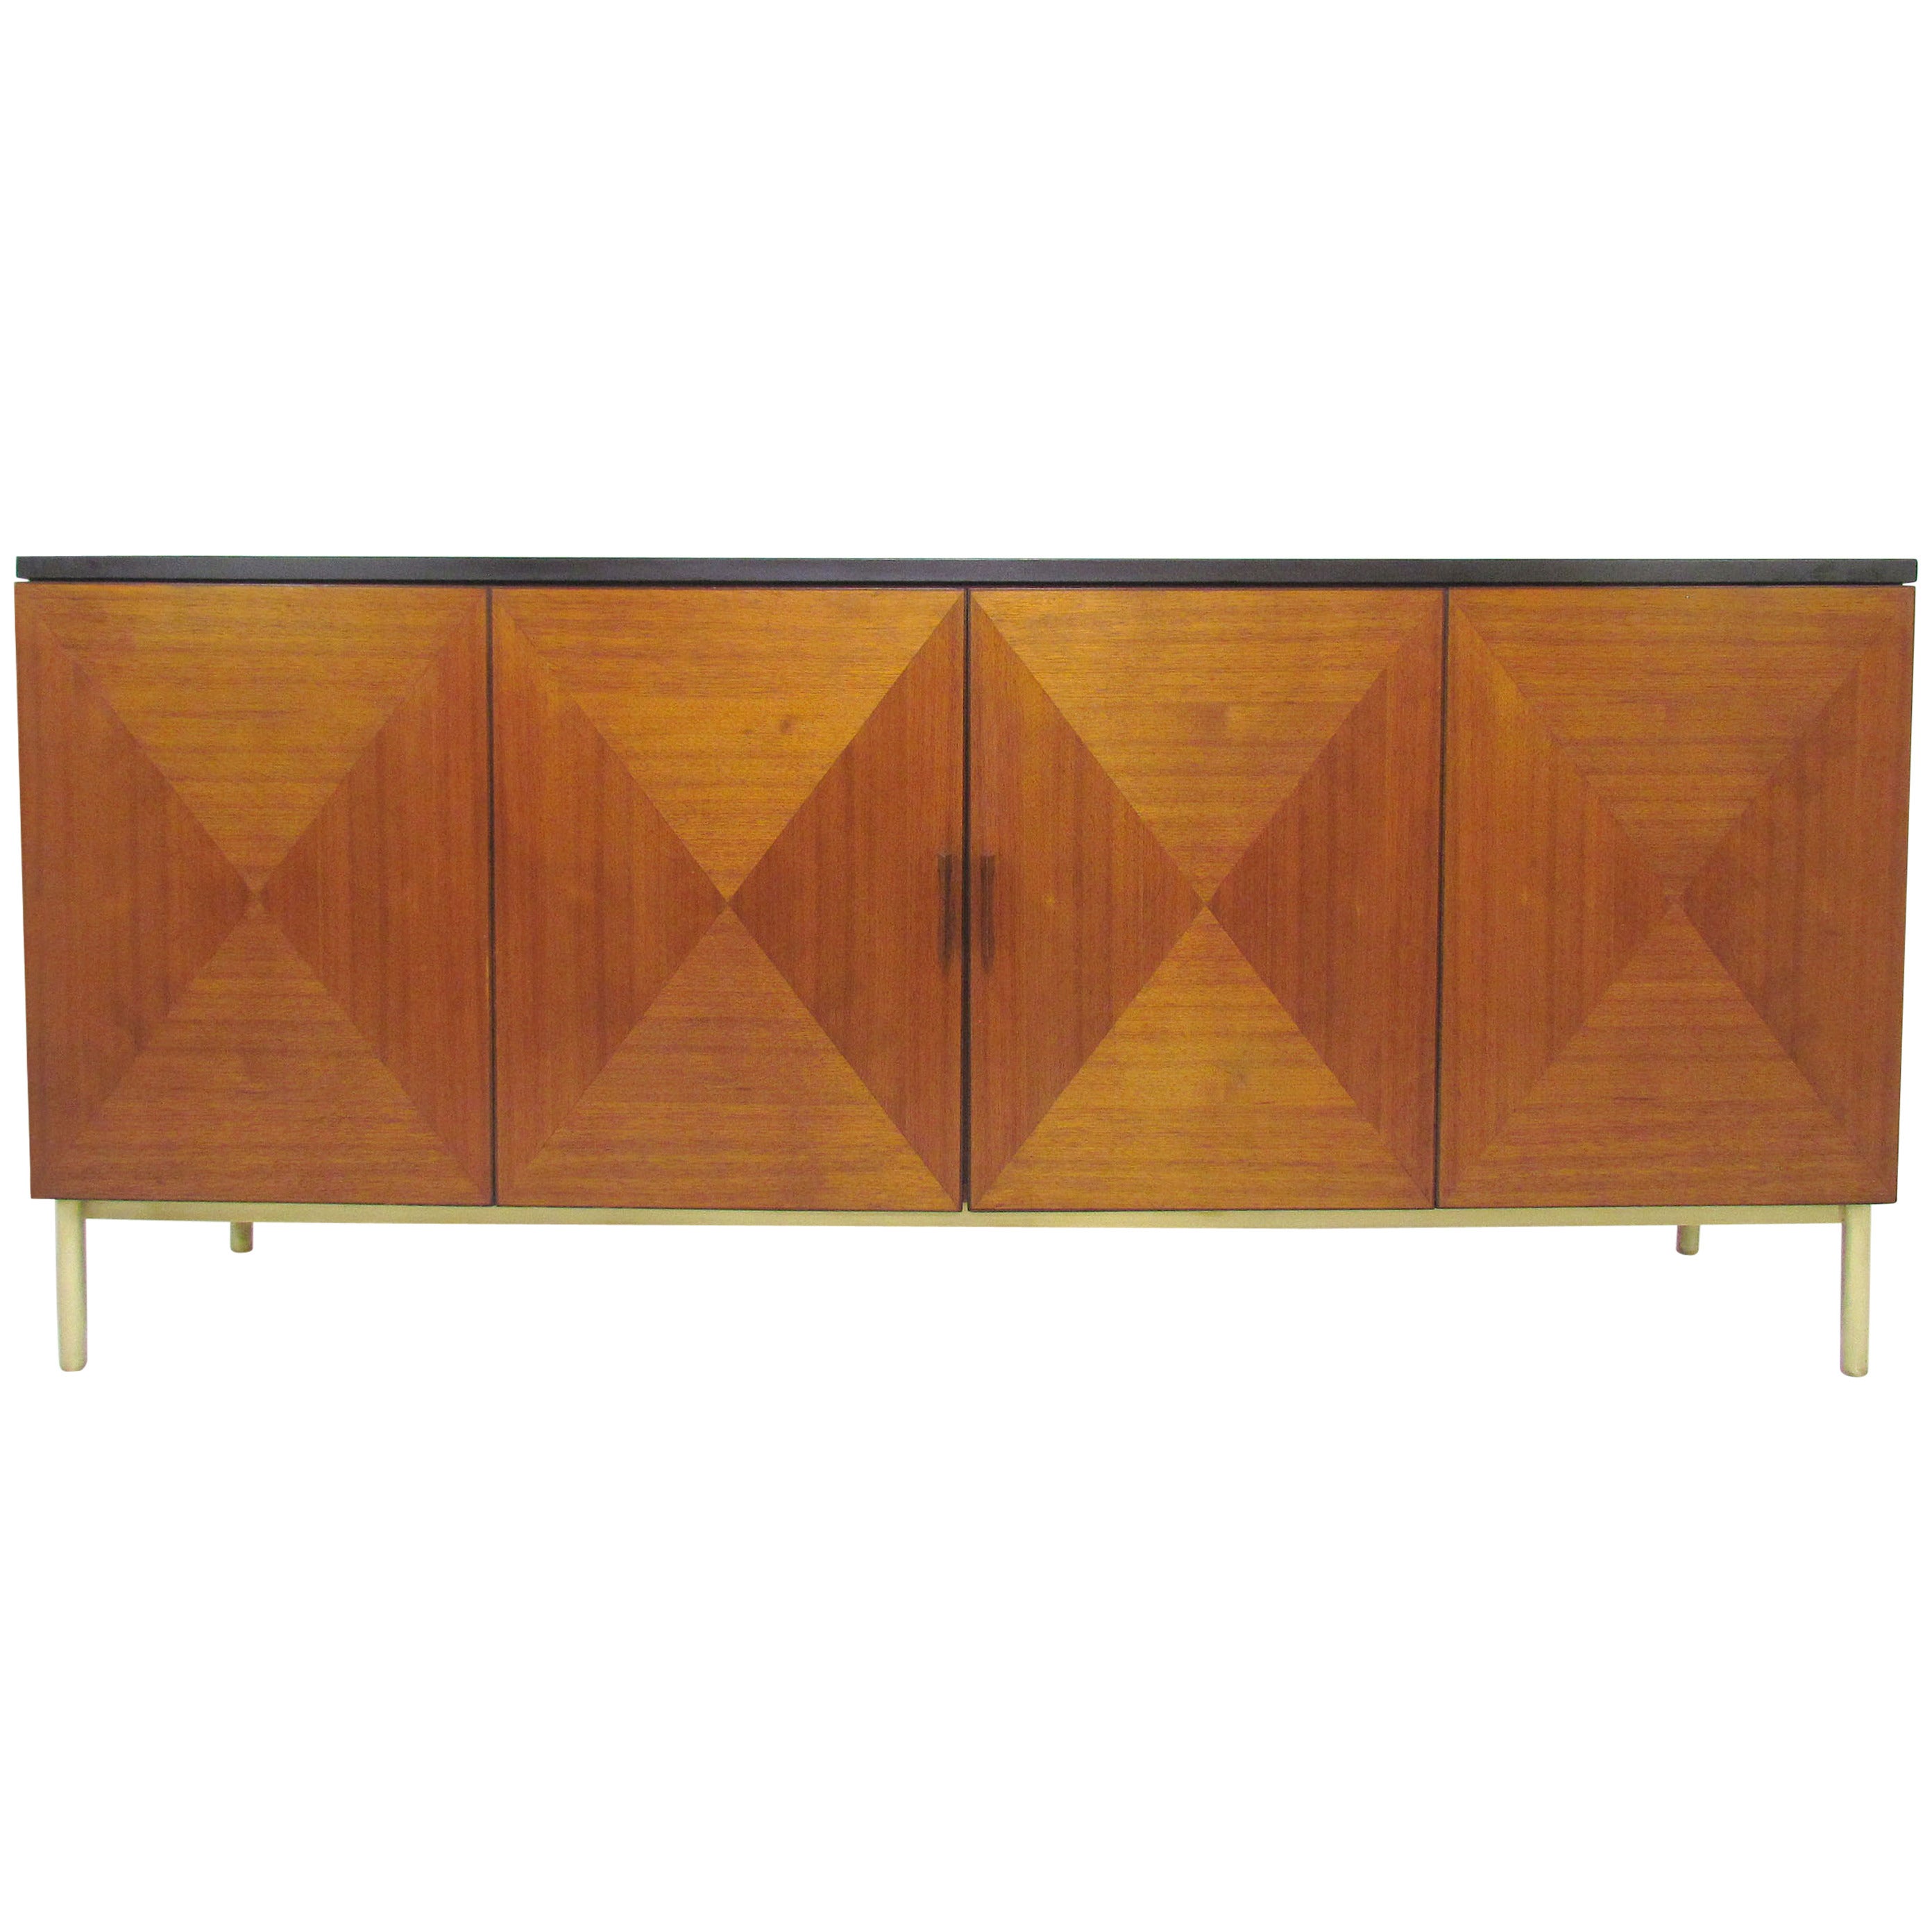 Modernist Credenza with Slate Top by Paul McCobb for Directional by Calvin